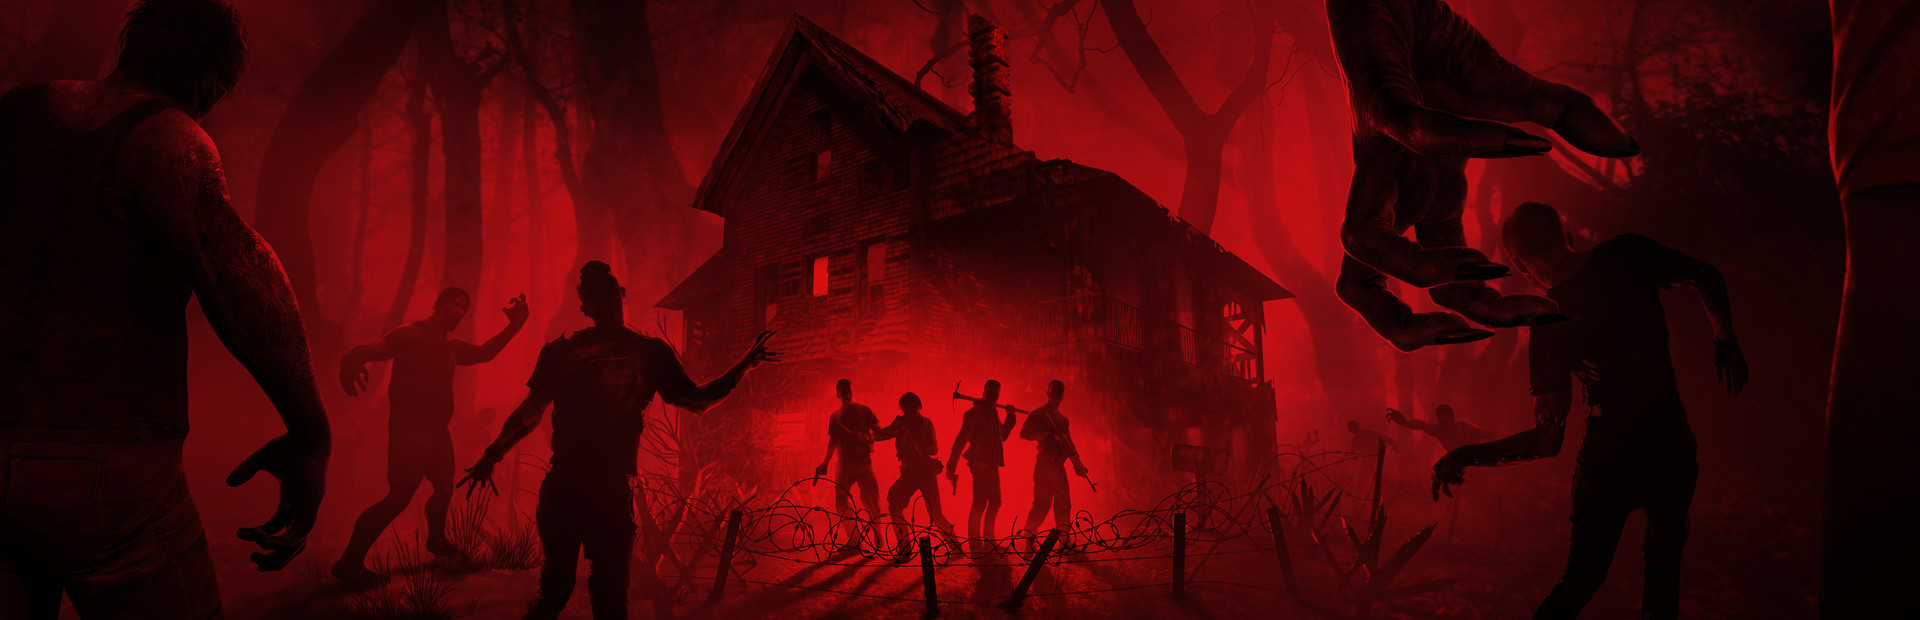 7 Days to Die Dedicated Server cover image